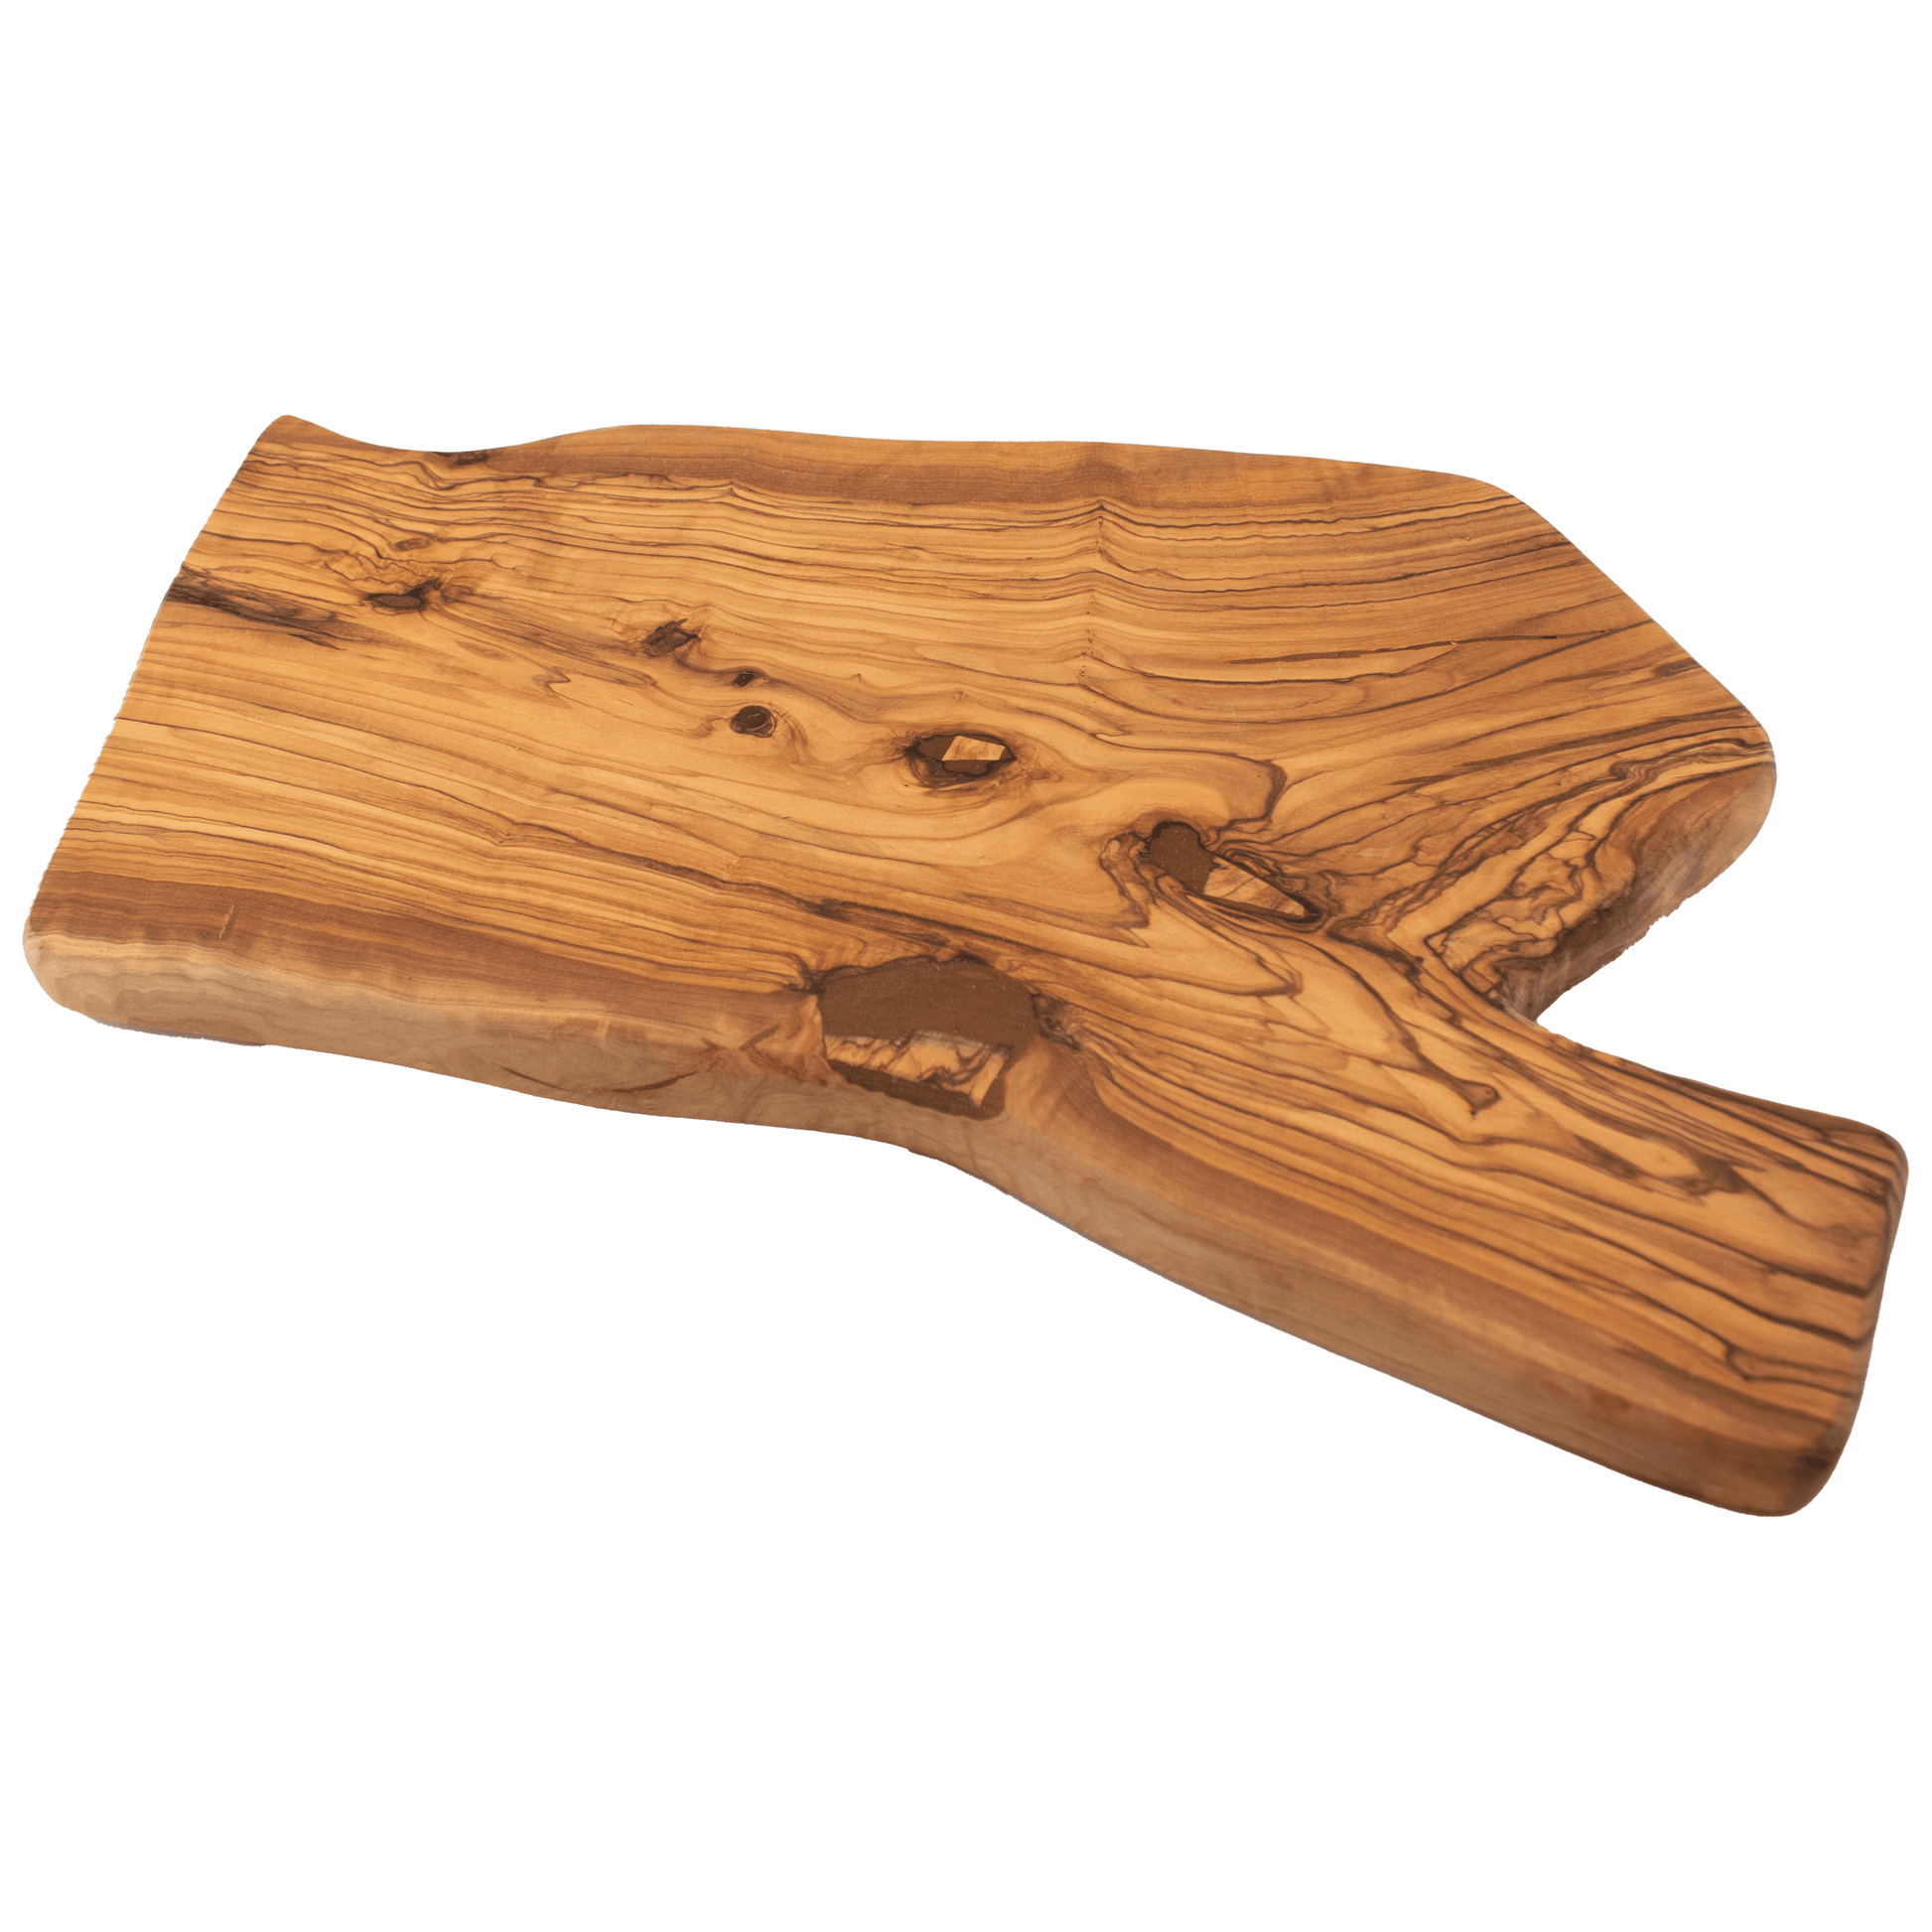 Rustic Serving Denmark 2 Piece Acacia Wood Round Cutting Board Set (Set of 2)